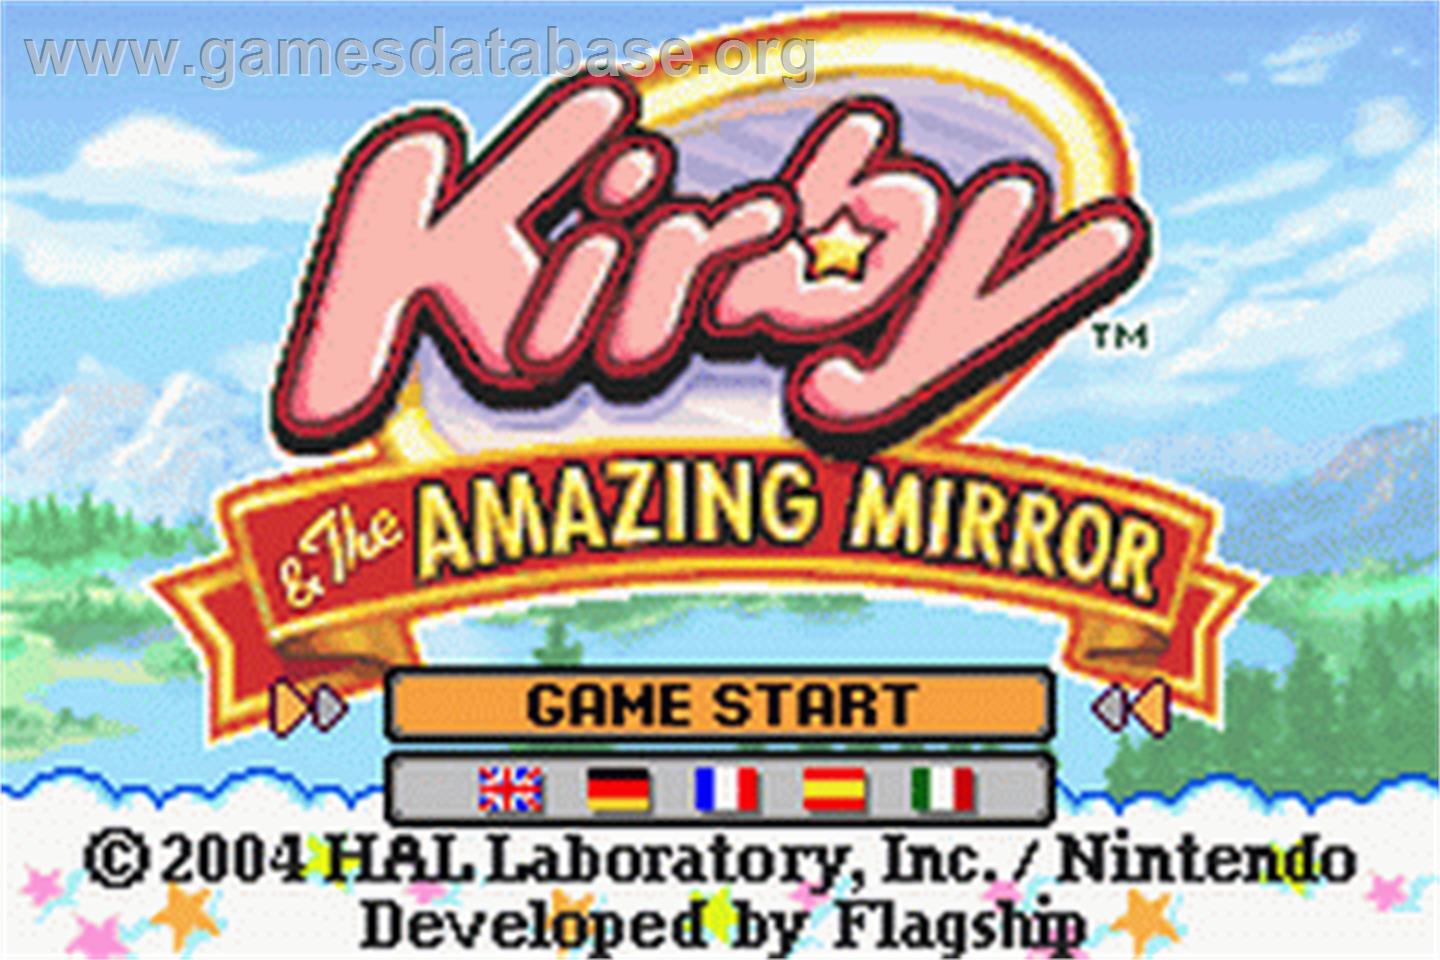 Kirby and the Amazing Mirror - Nintendo Game Boy Advance - Artwork - Title Screen